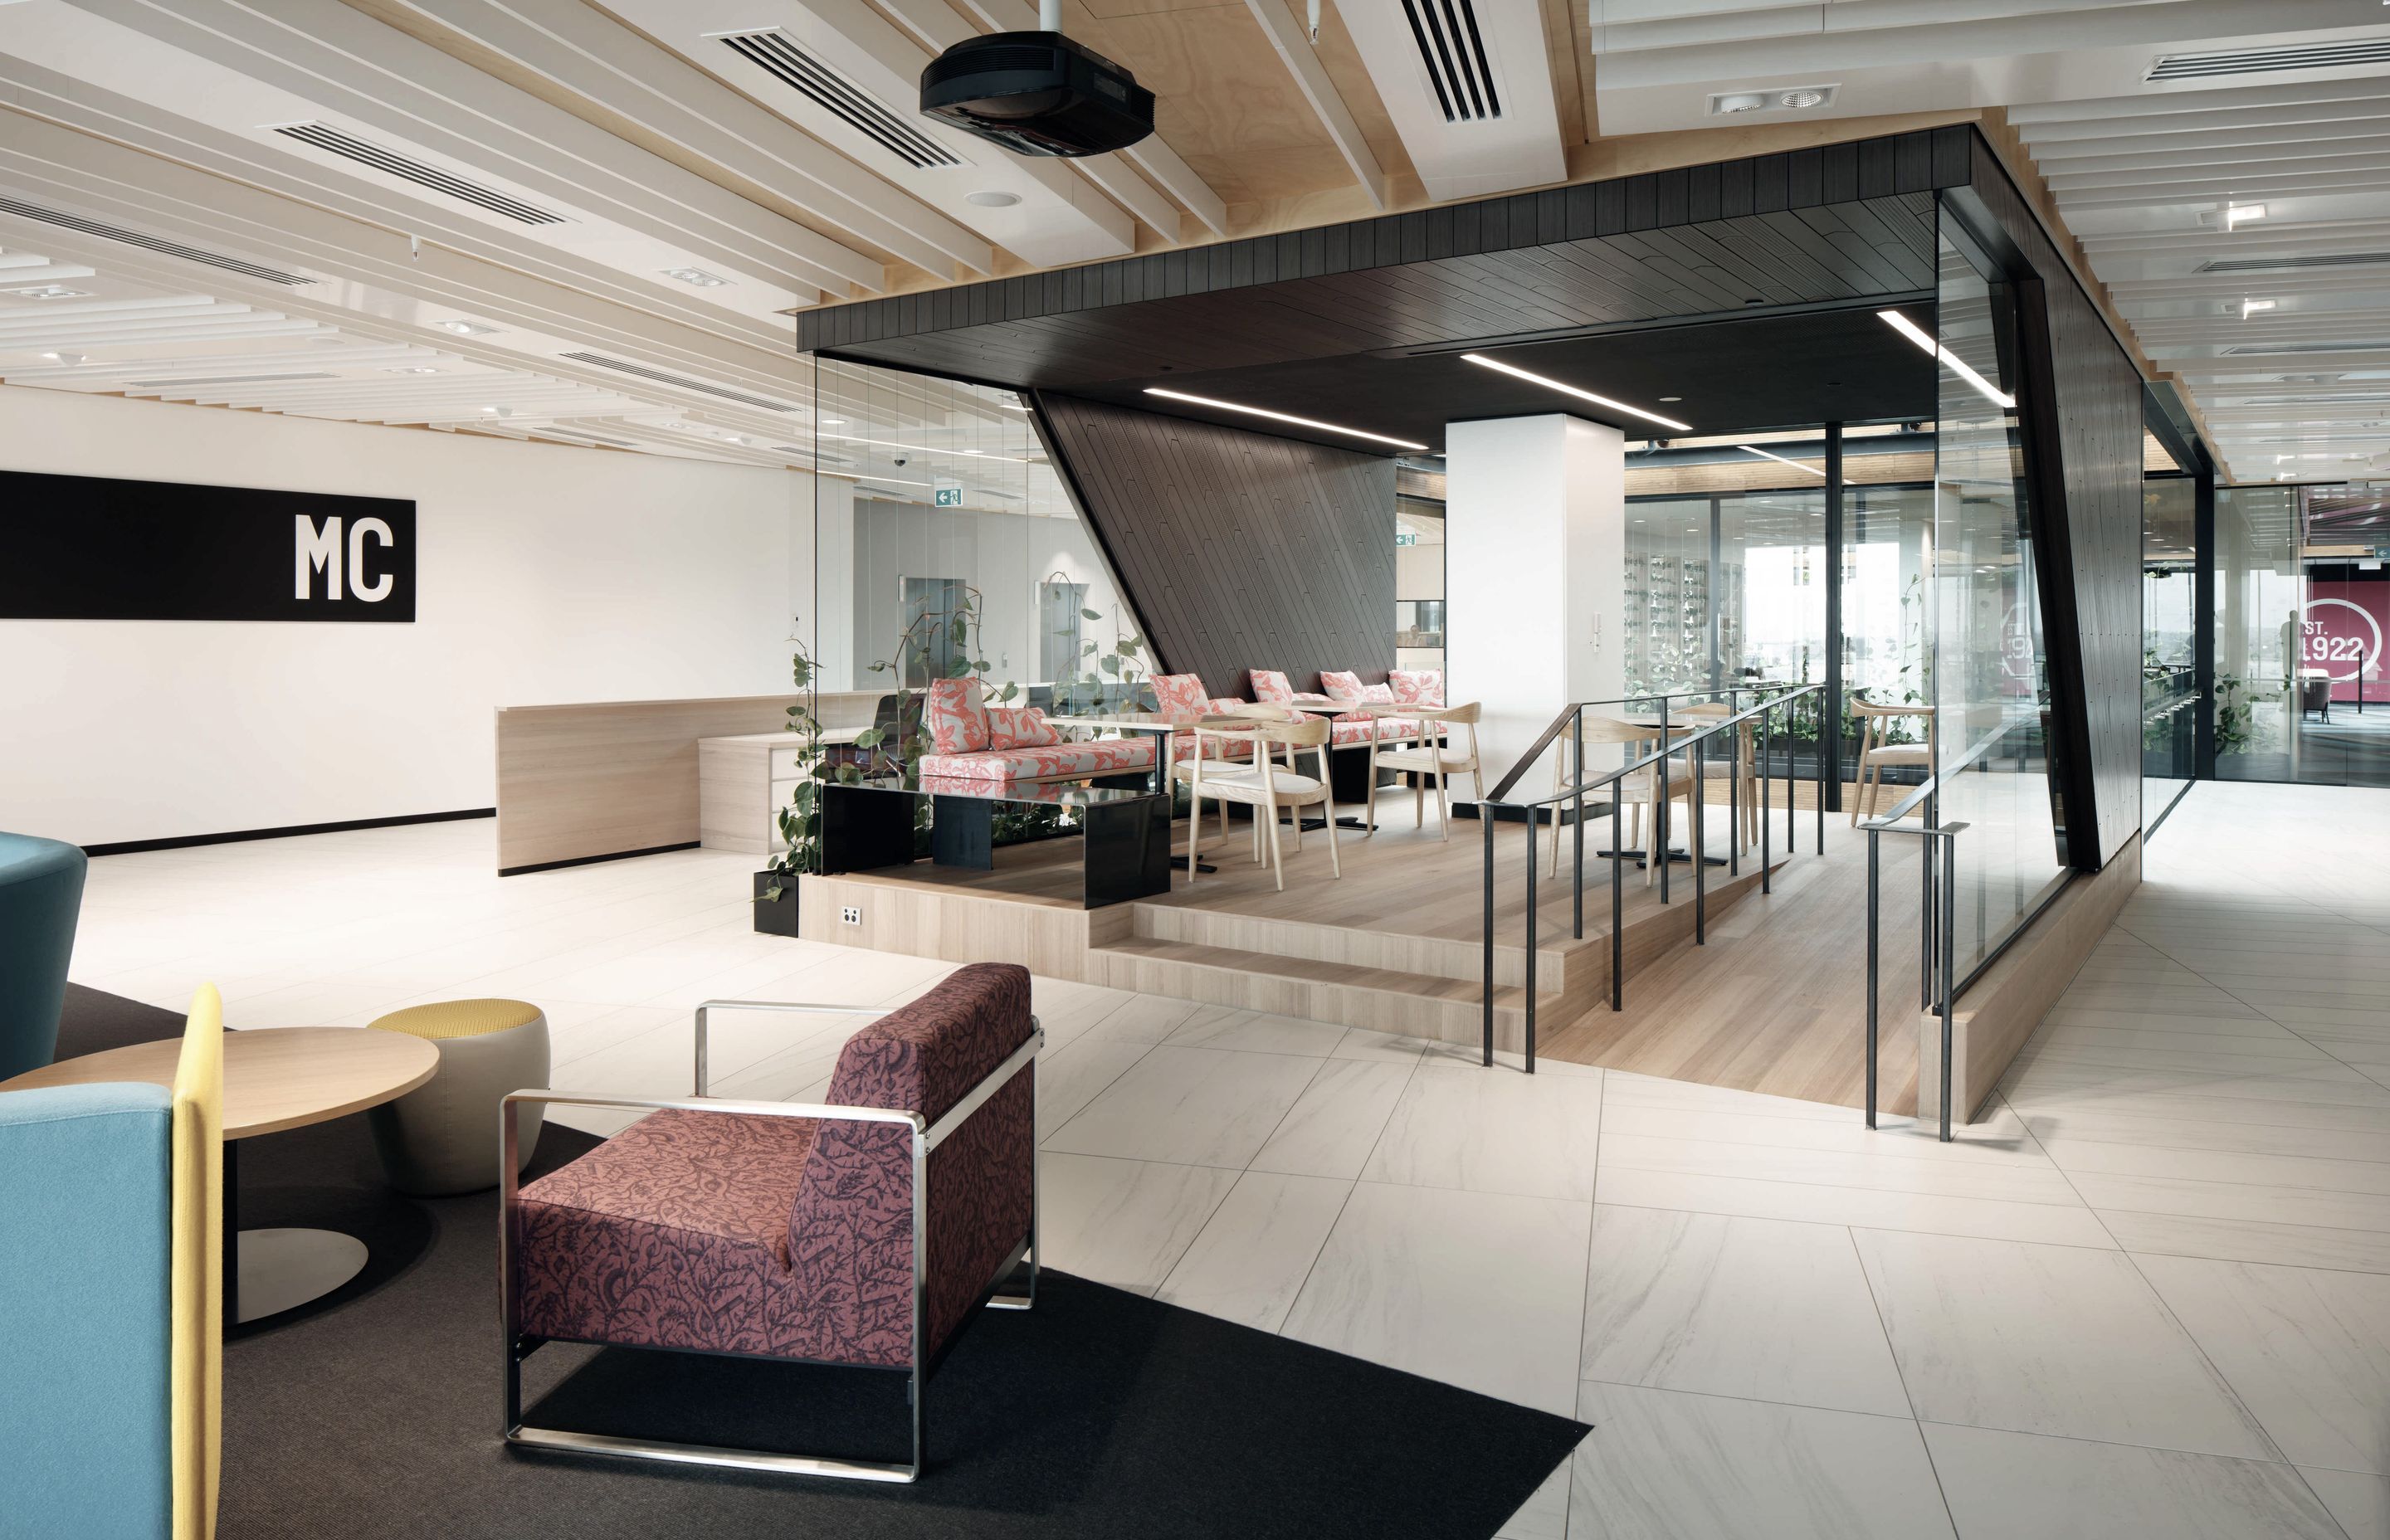 Meredith Connell Fitout